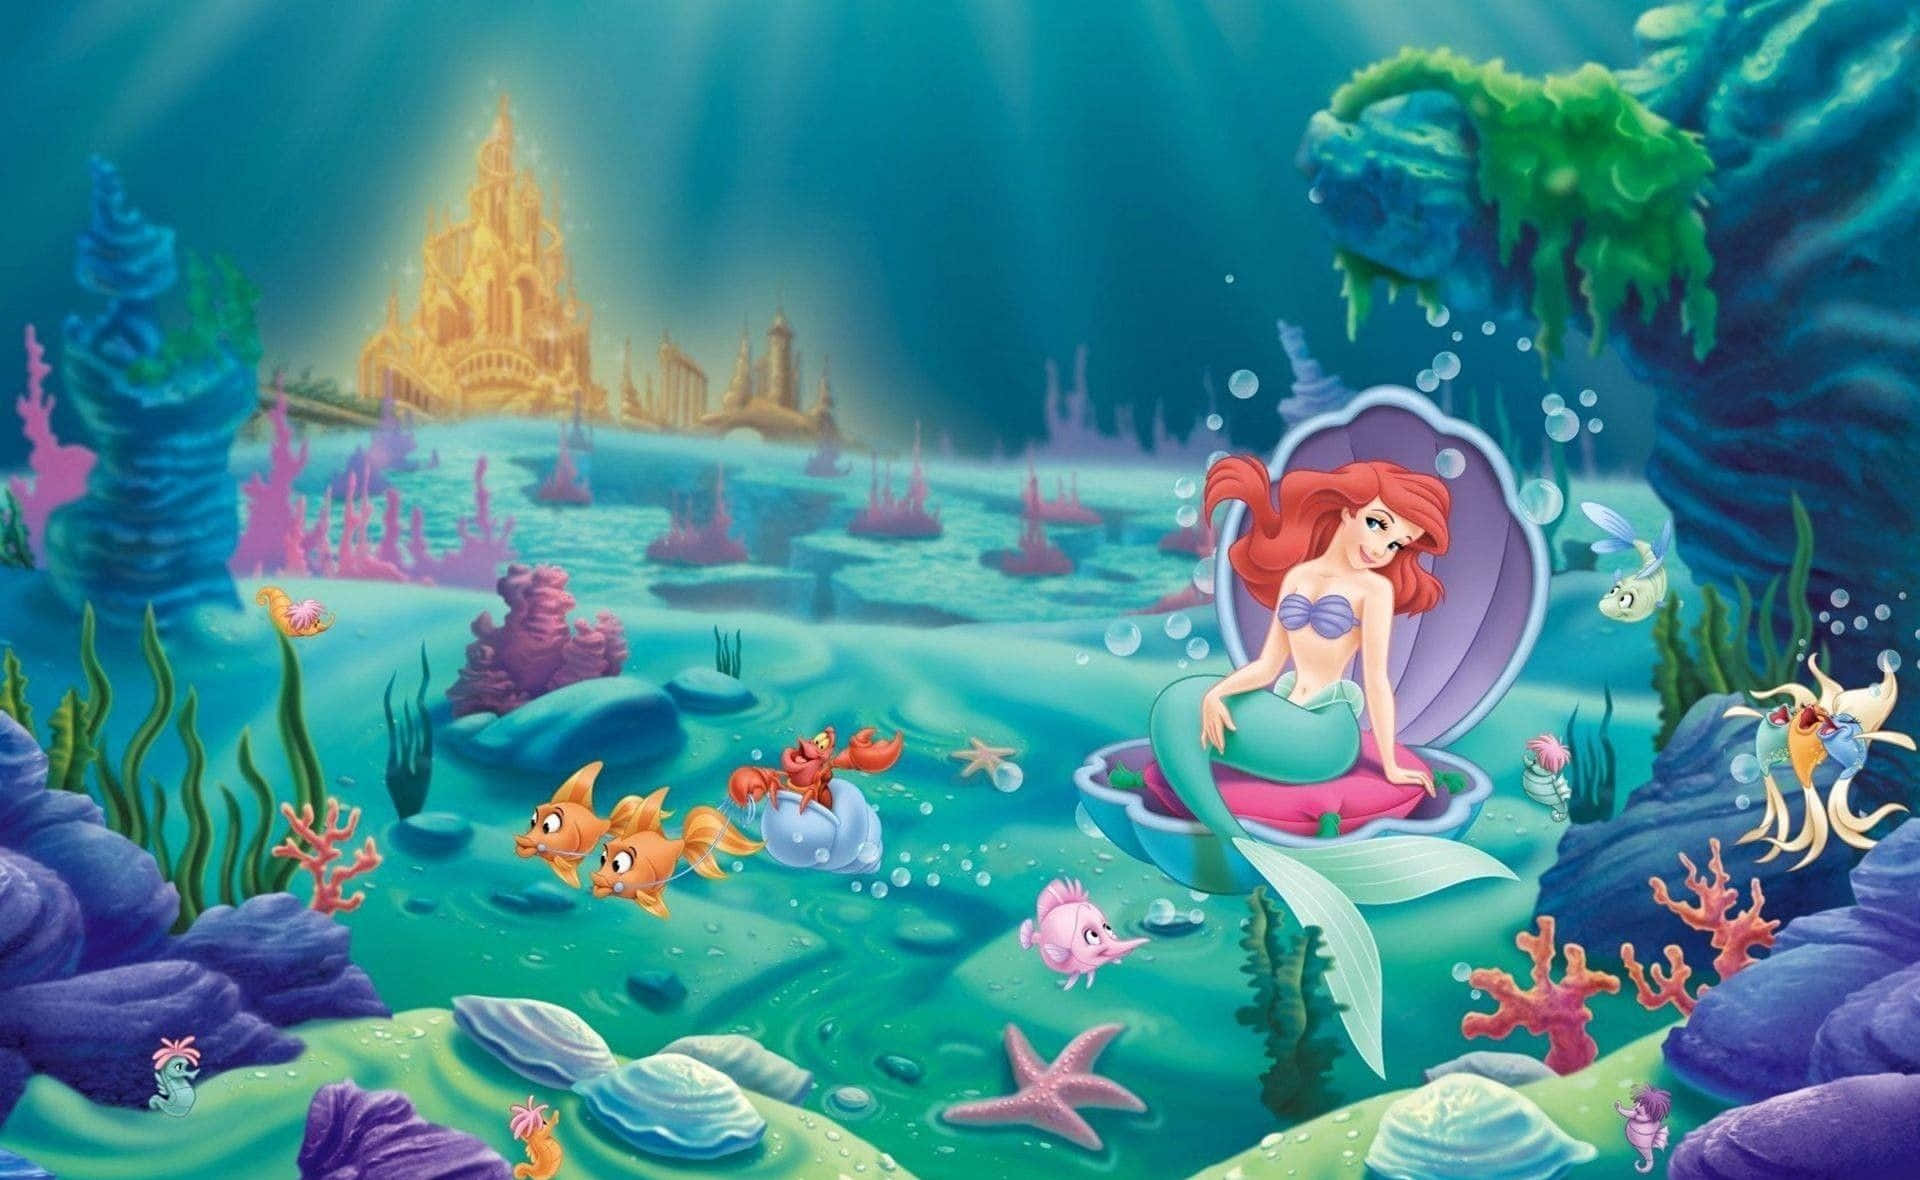 The Little Mermaid - A Dream of Freedom Wallpaper